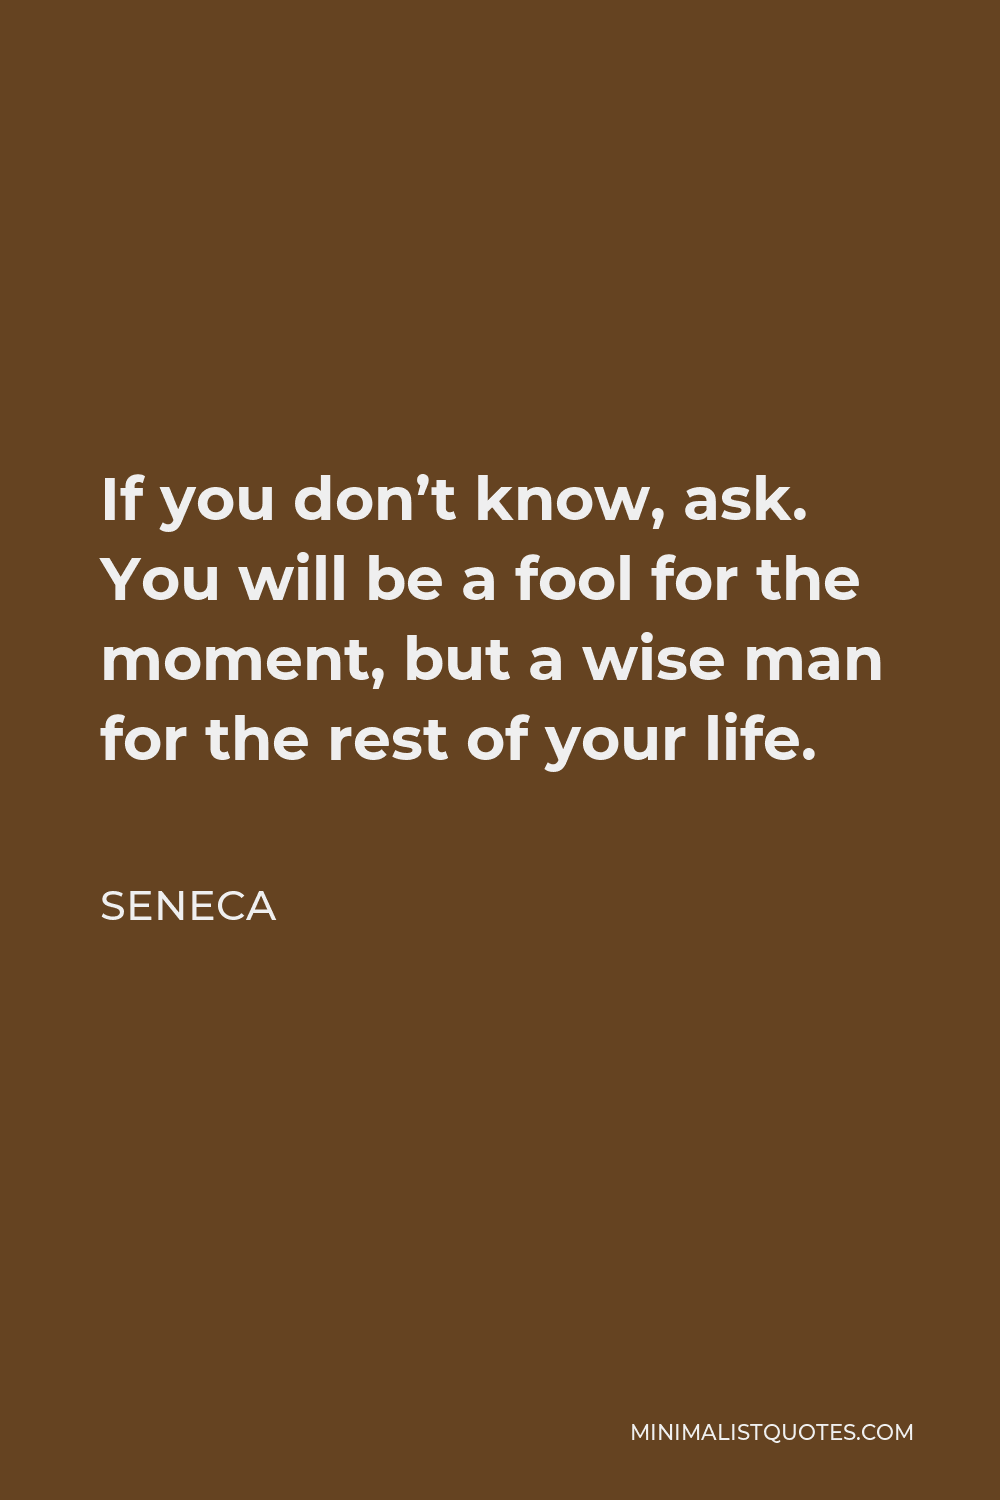 Seneca Quote - If you don’t know, ask. You will be a fool for the moment, but a wise man for the rest of your life.